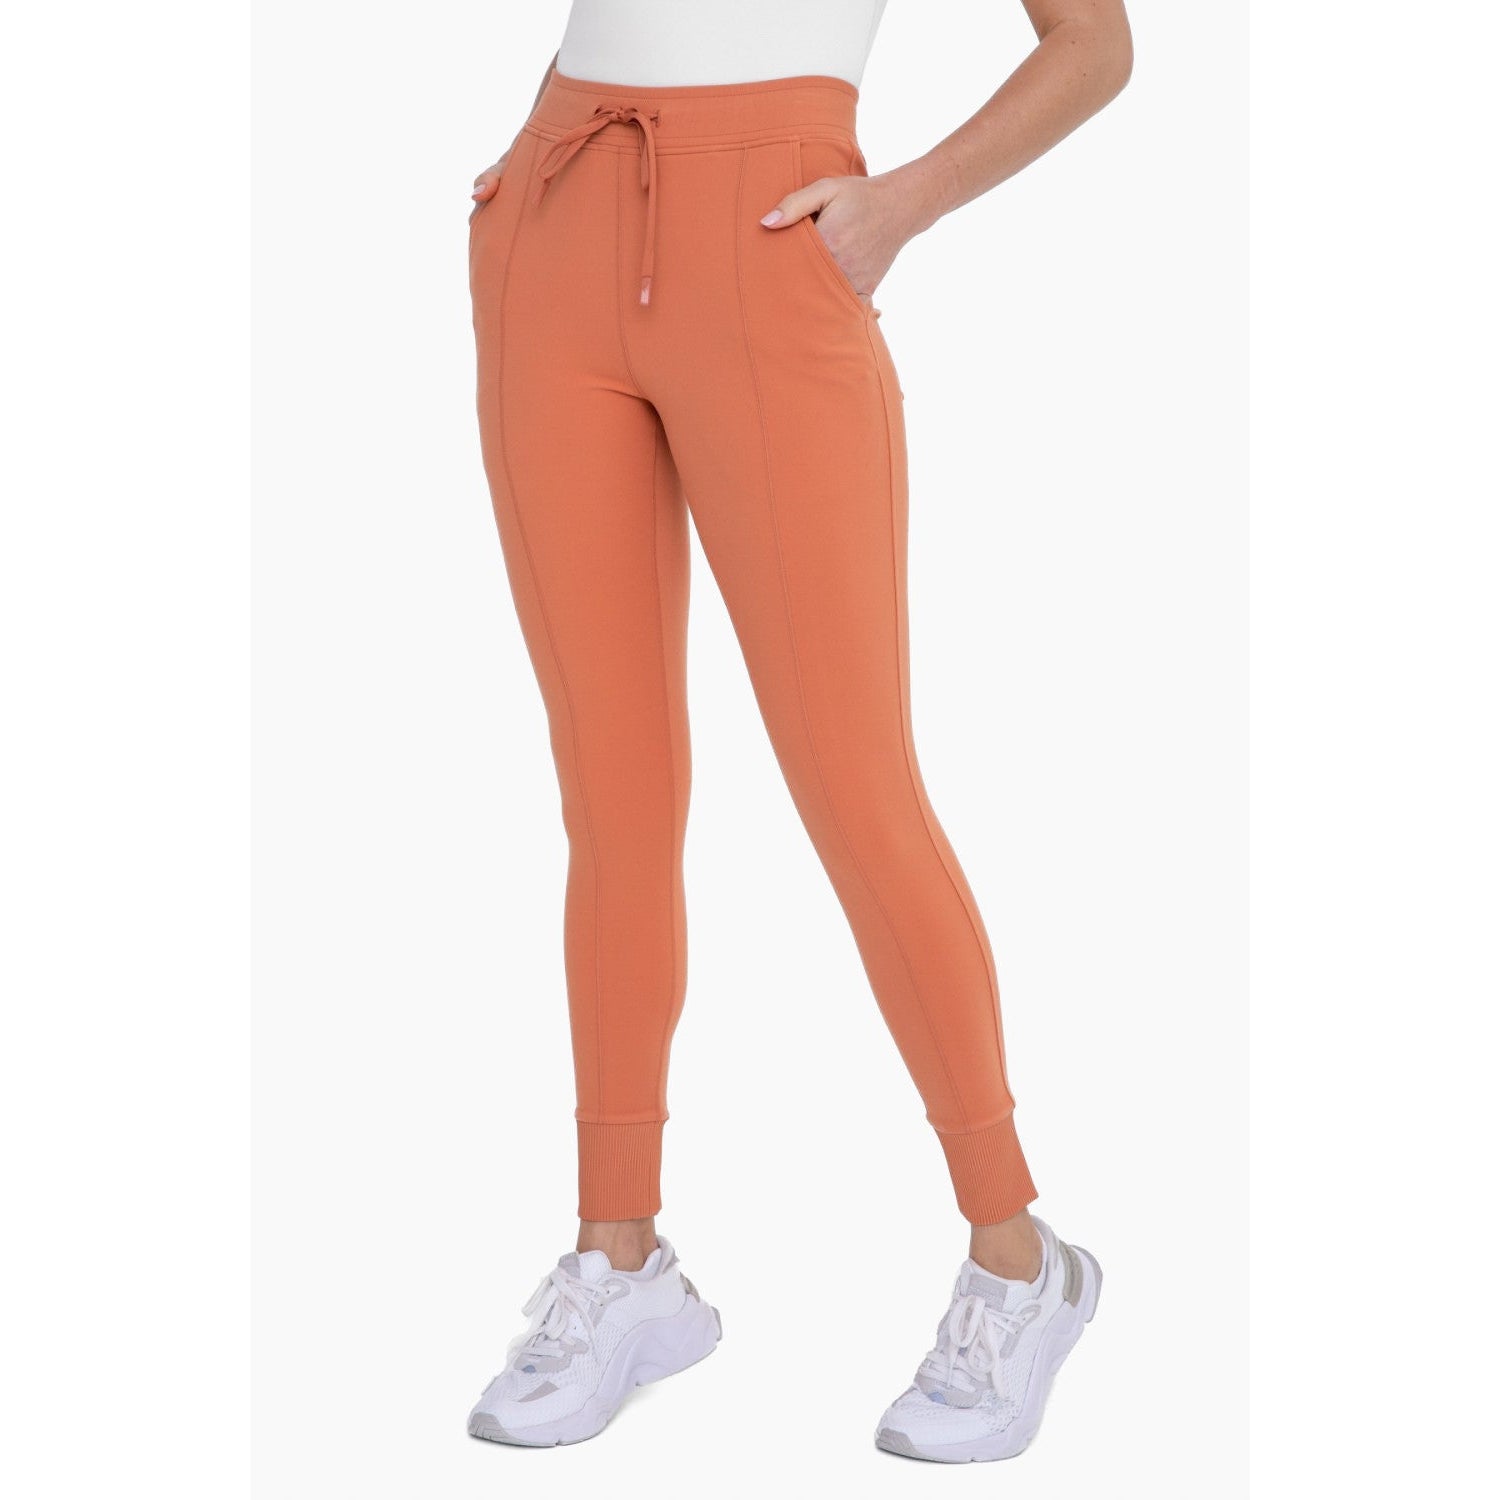 Eye Candy Juniors' Peached Jogger Pants 